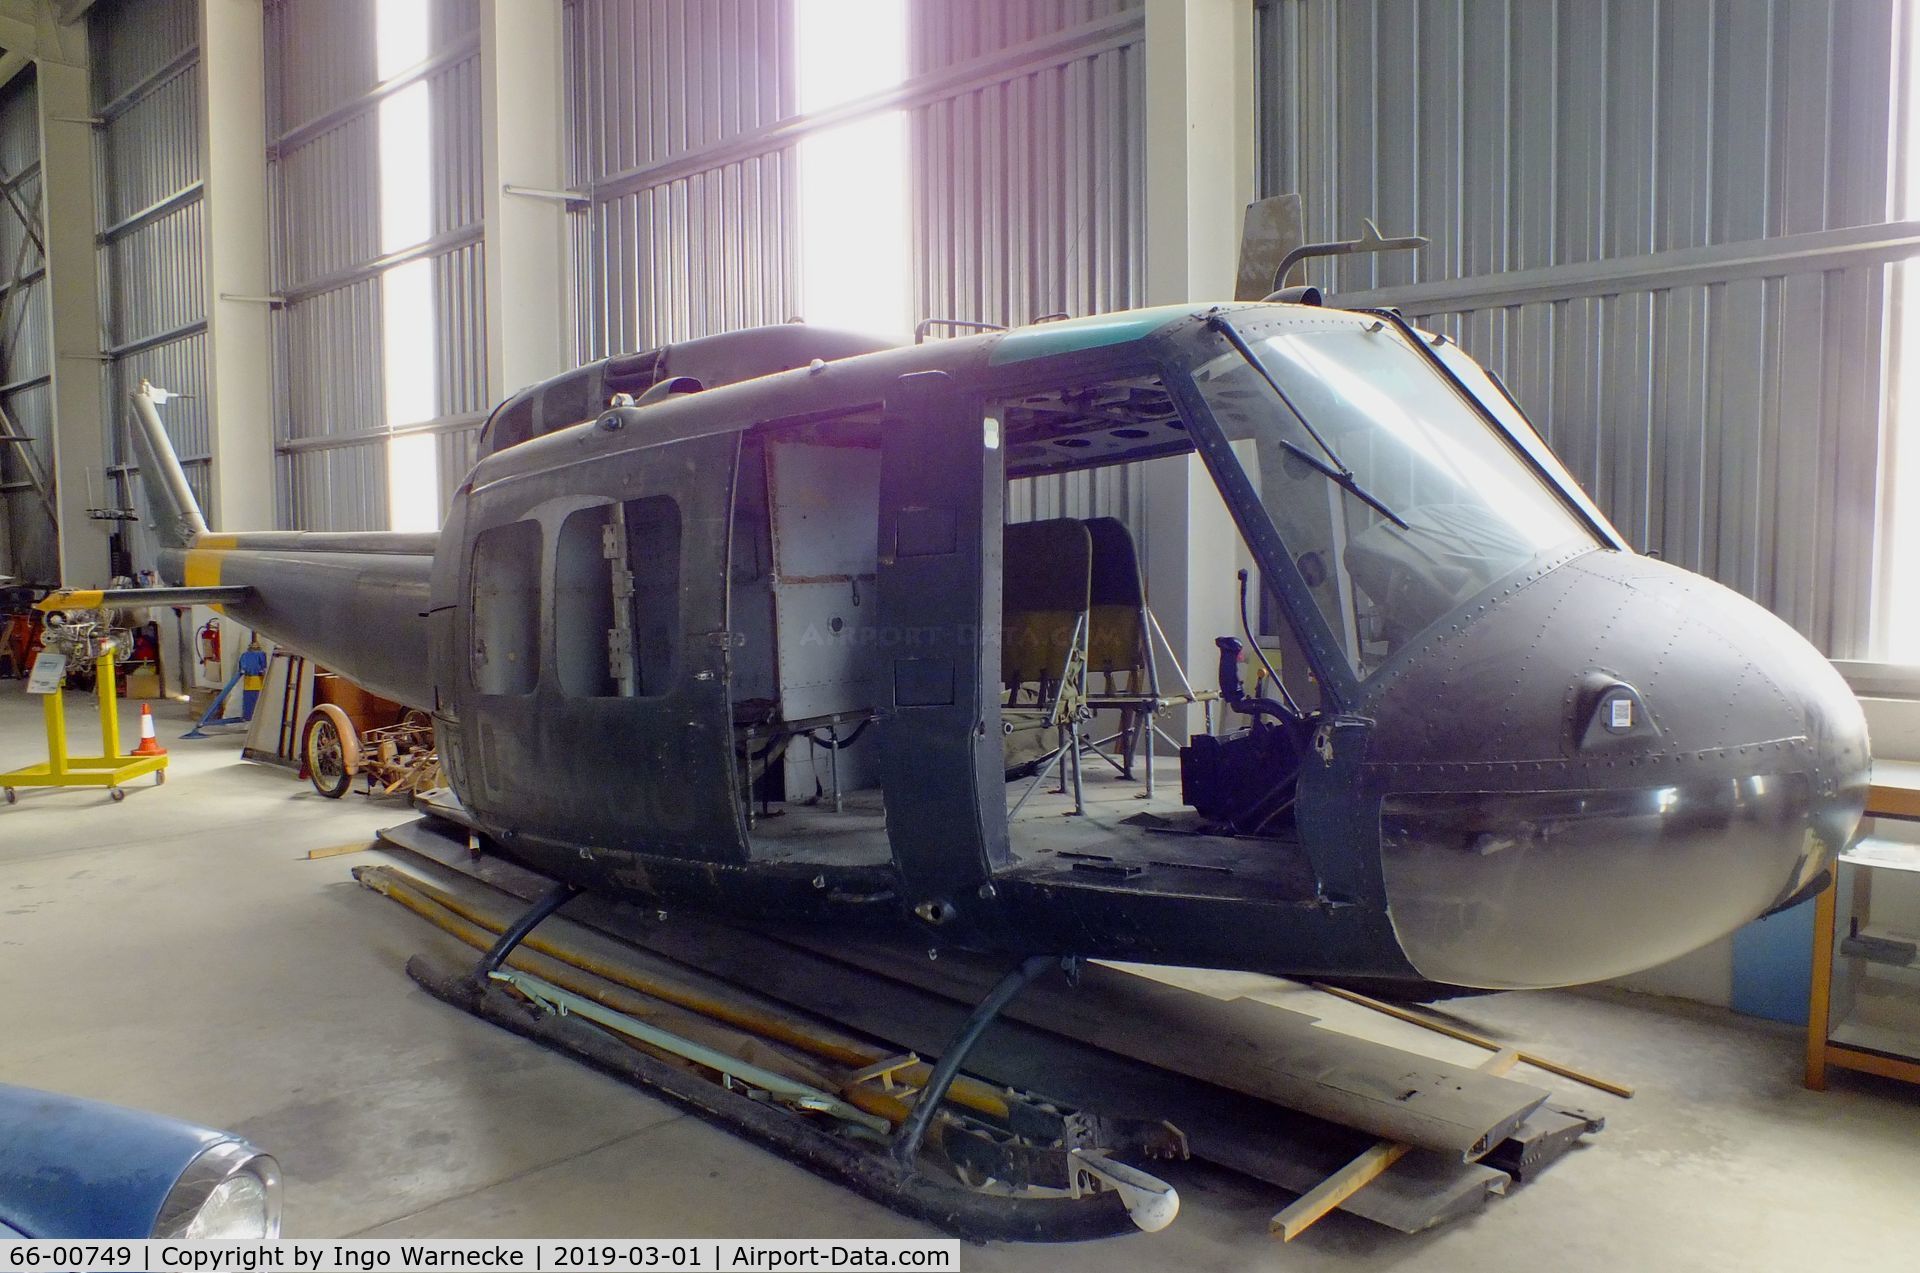 66-00749, 1966 Bell UH-1H Iroquois C/N 5232, Bell UH-1H Iroquois (minus rotors, painted to represent a UH-1D of german borderguards for movie purposes) at the Malta Aviation Museum, Ta' Qali